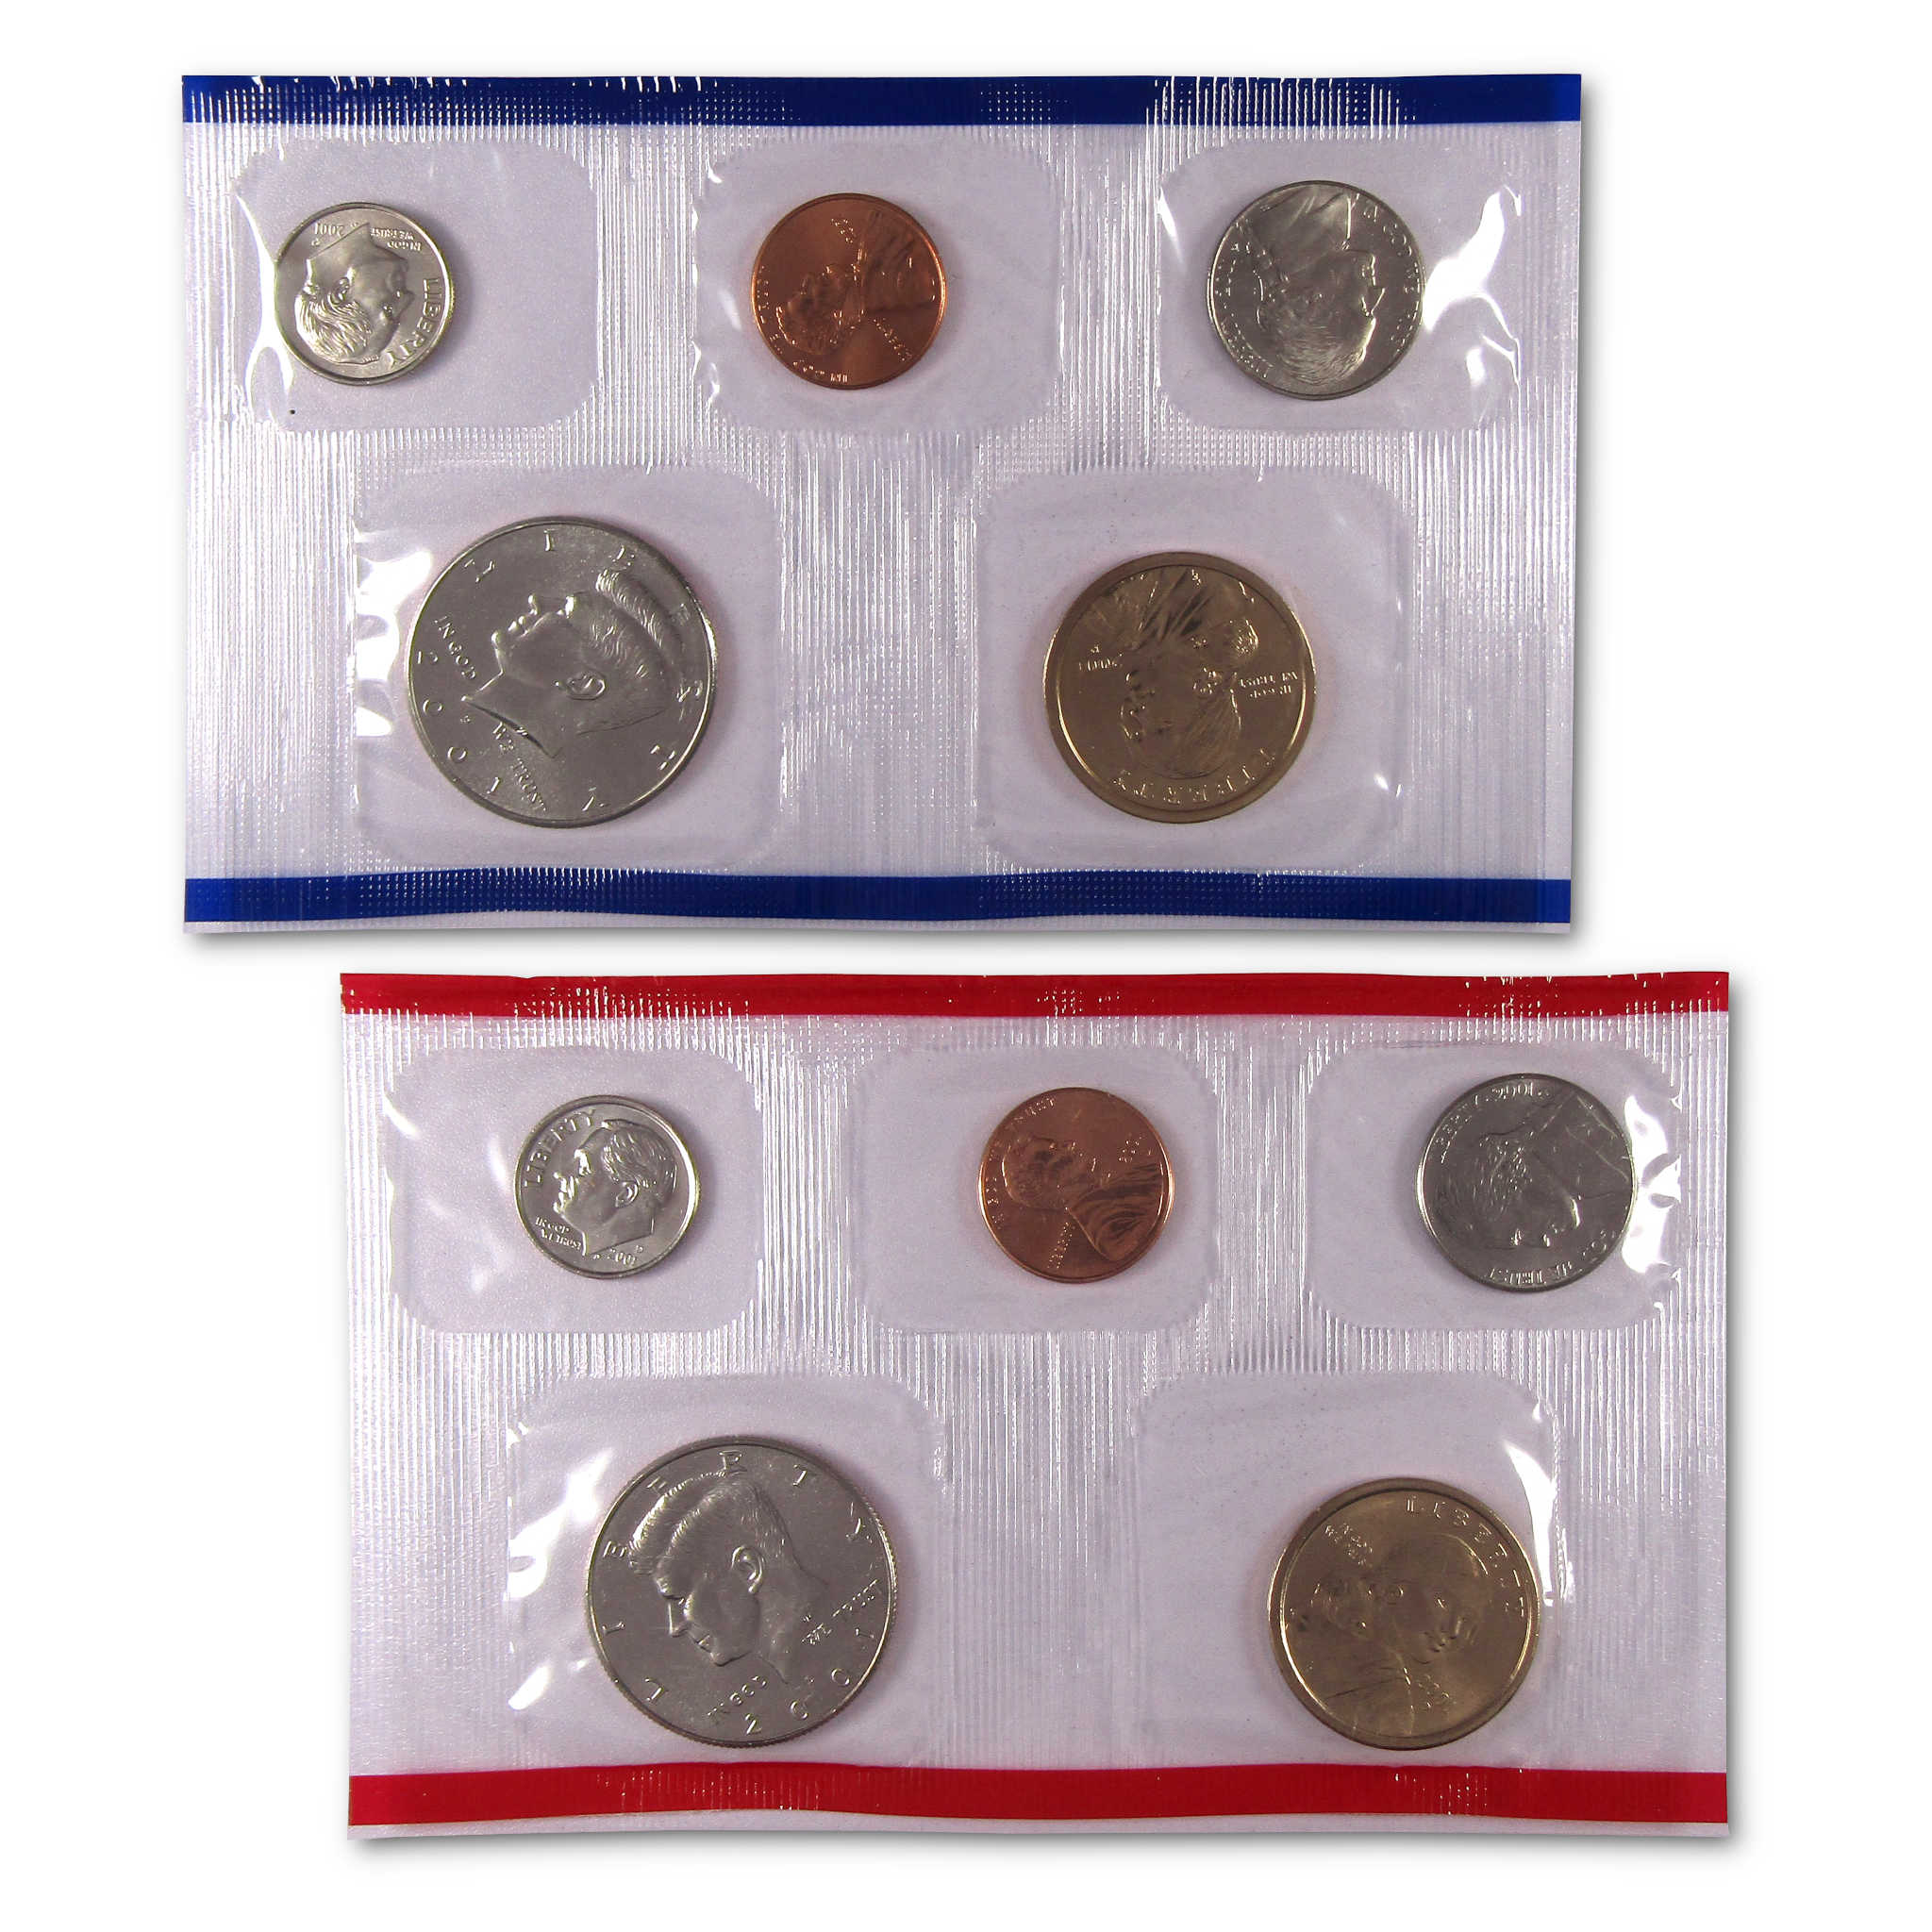 2001 Uncirculated Coin Set U.S Mint Original Government Packaging OGP